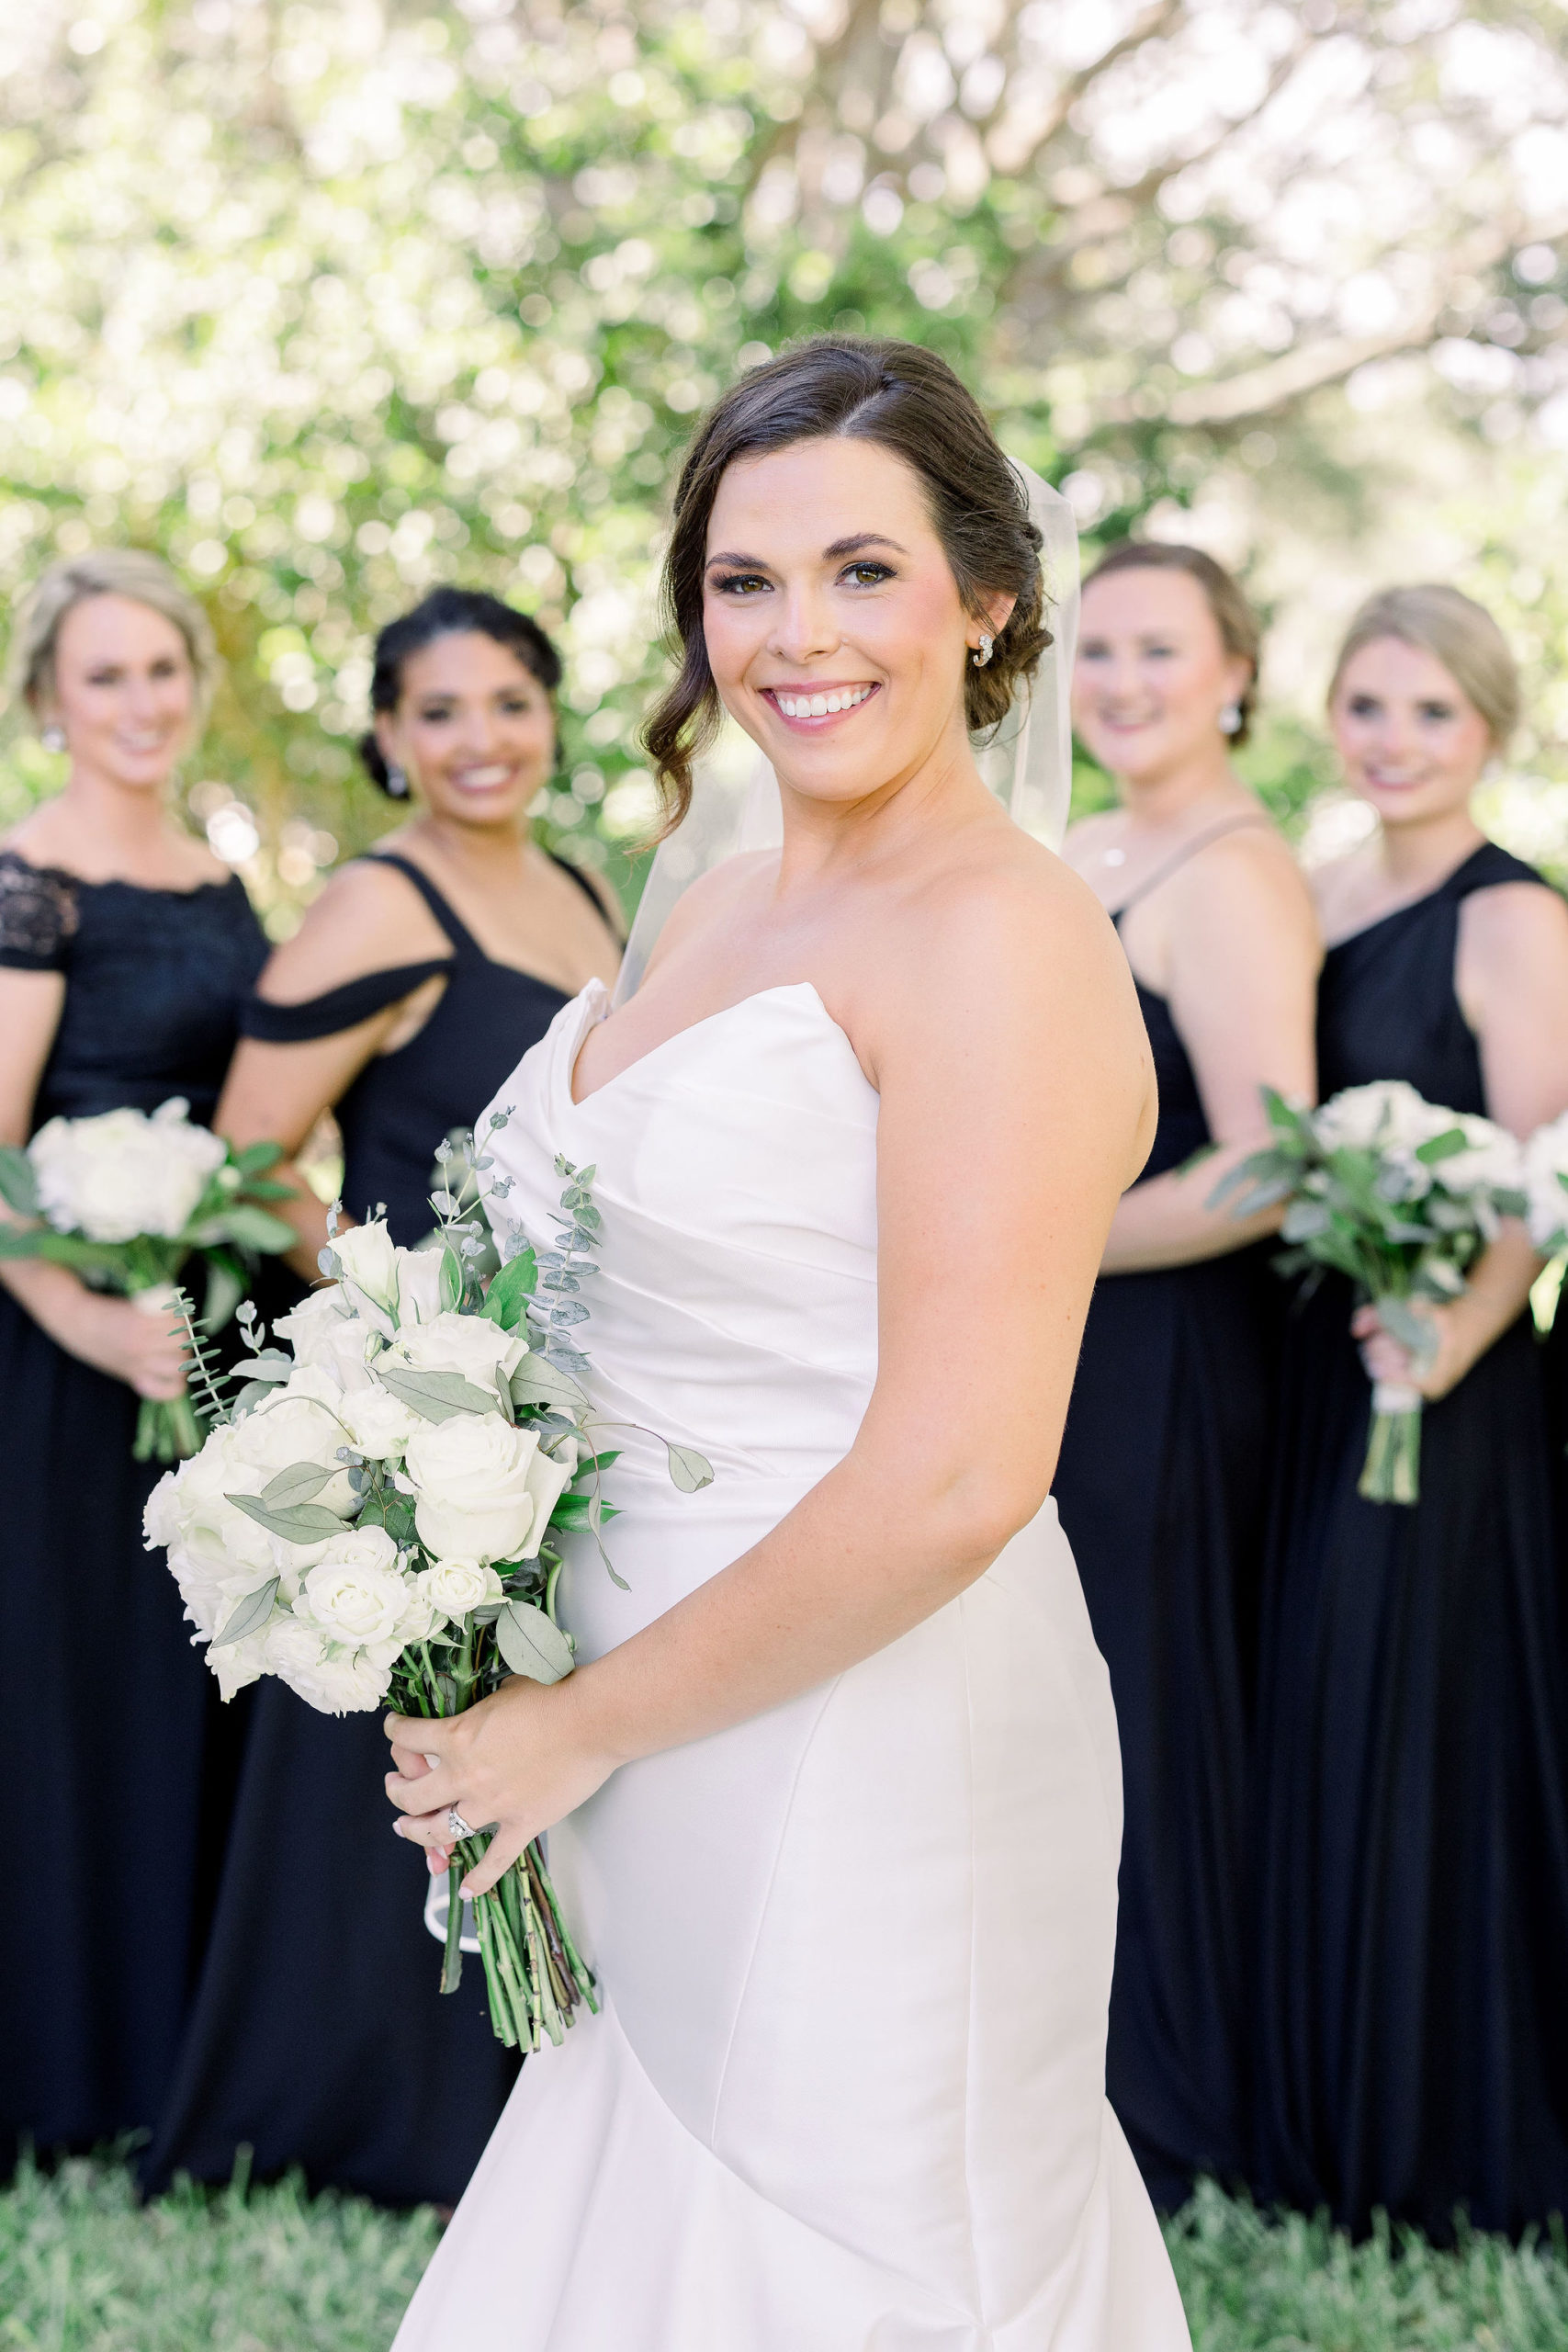 A bride wearing a mermaid strapless wedding gown with her bridesmaids in the background smiling on her wedding day by Jommy Photography. Black summer bridesmaid dresses with the bride in white for a timeless classic wedding style.
